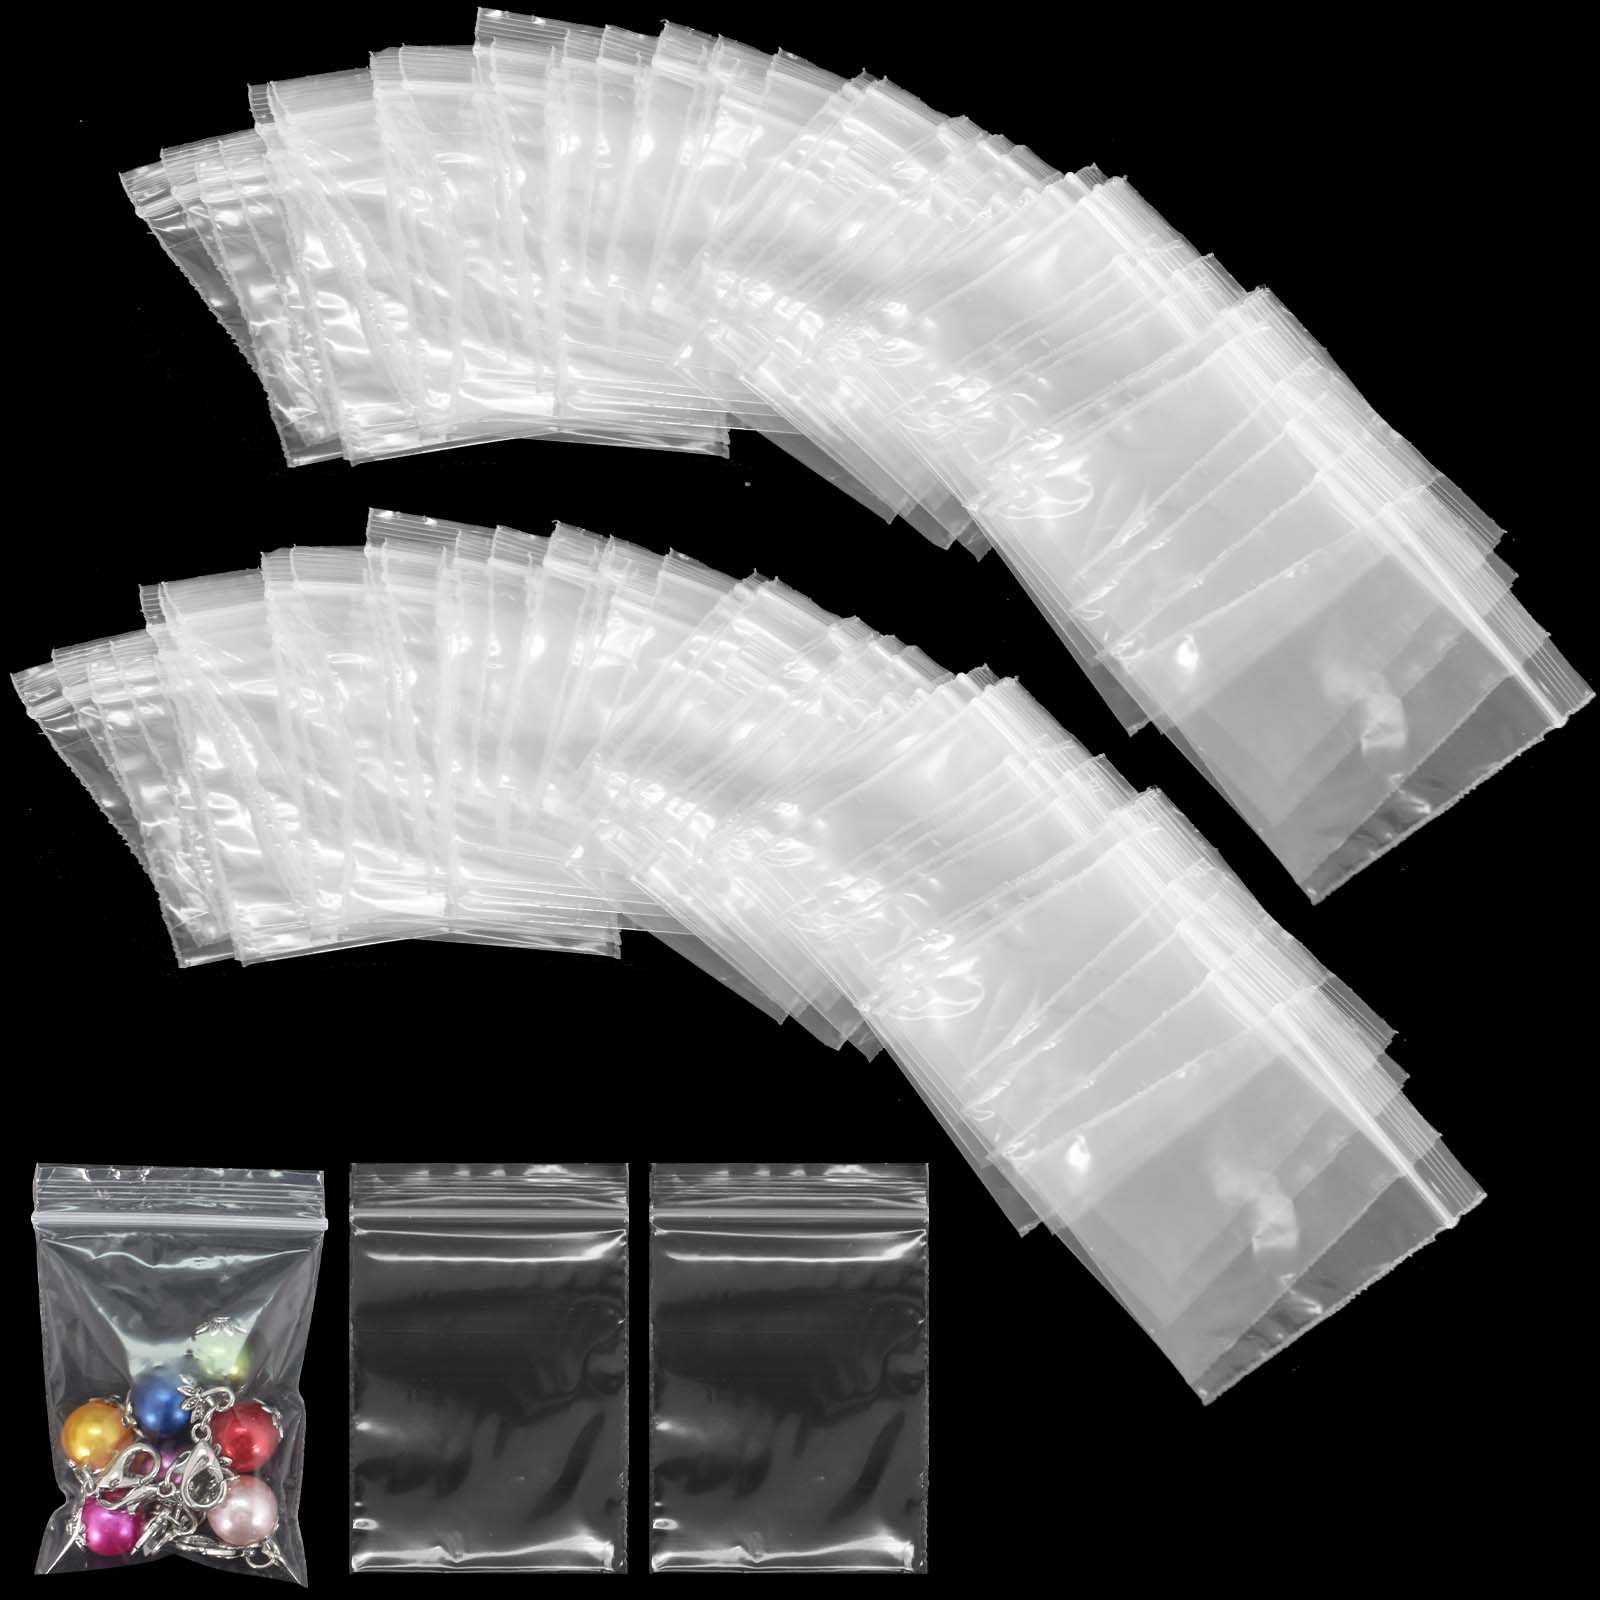 100 Small Clear Self Adhesive Zip Plastic Bags 6x4 Cm 